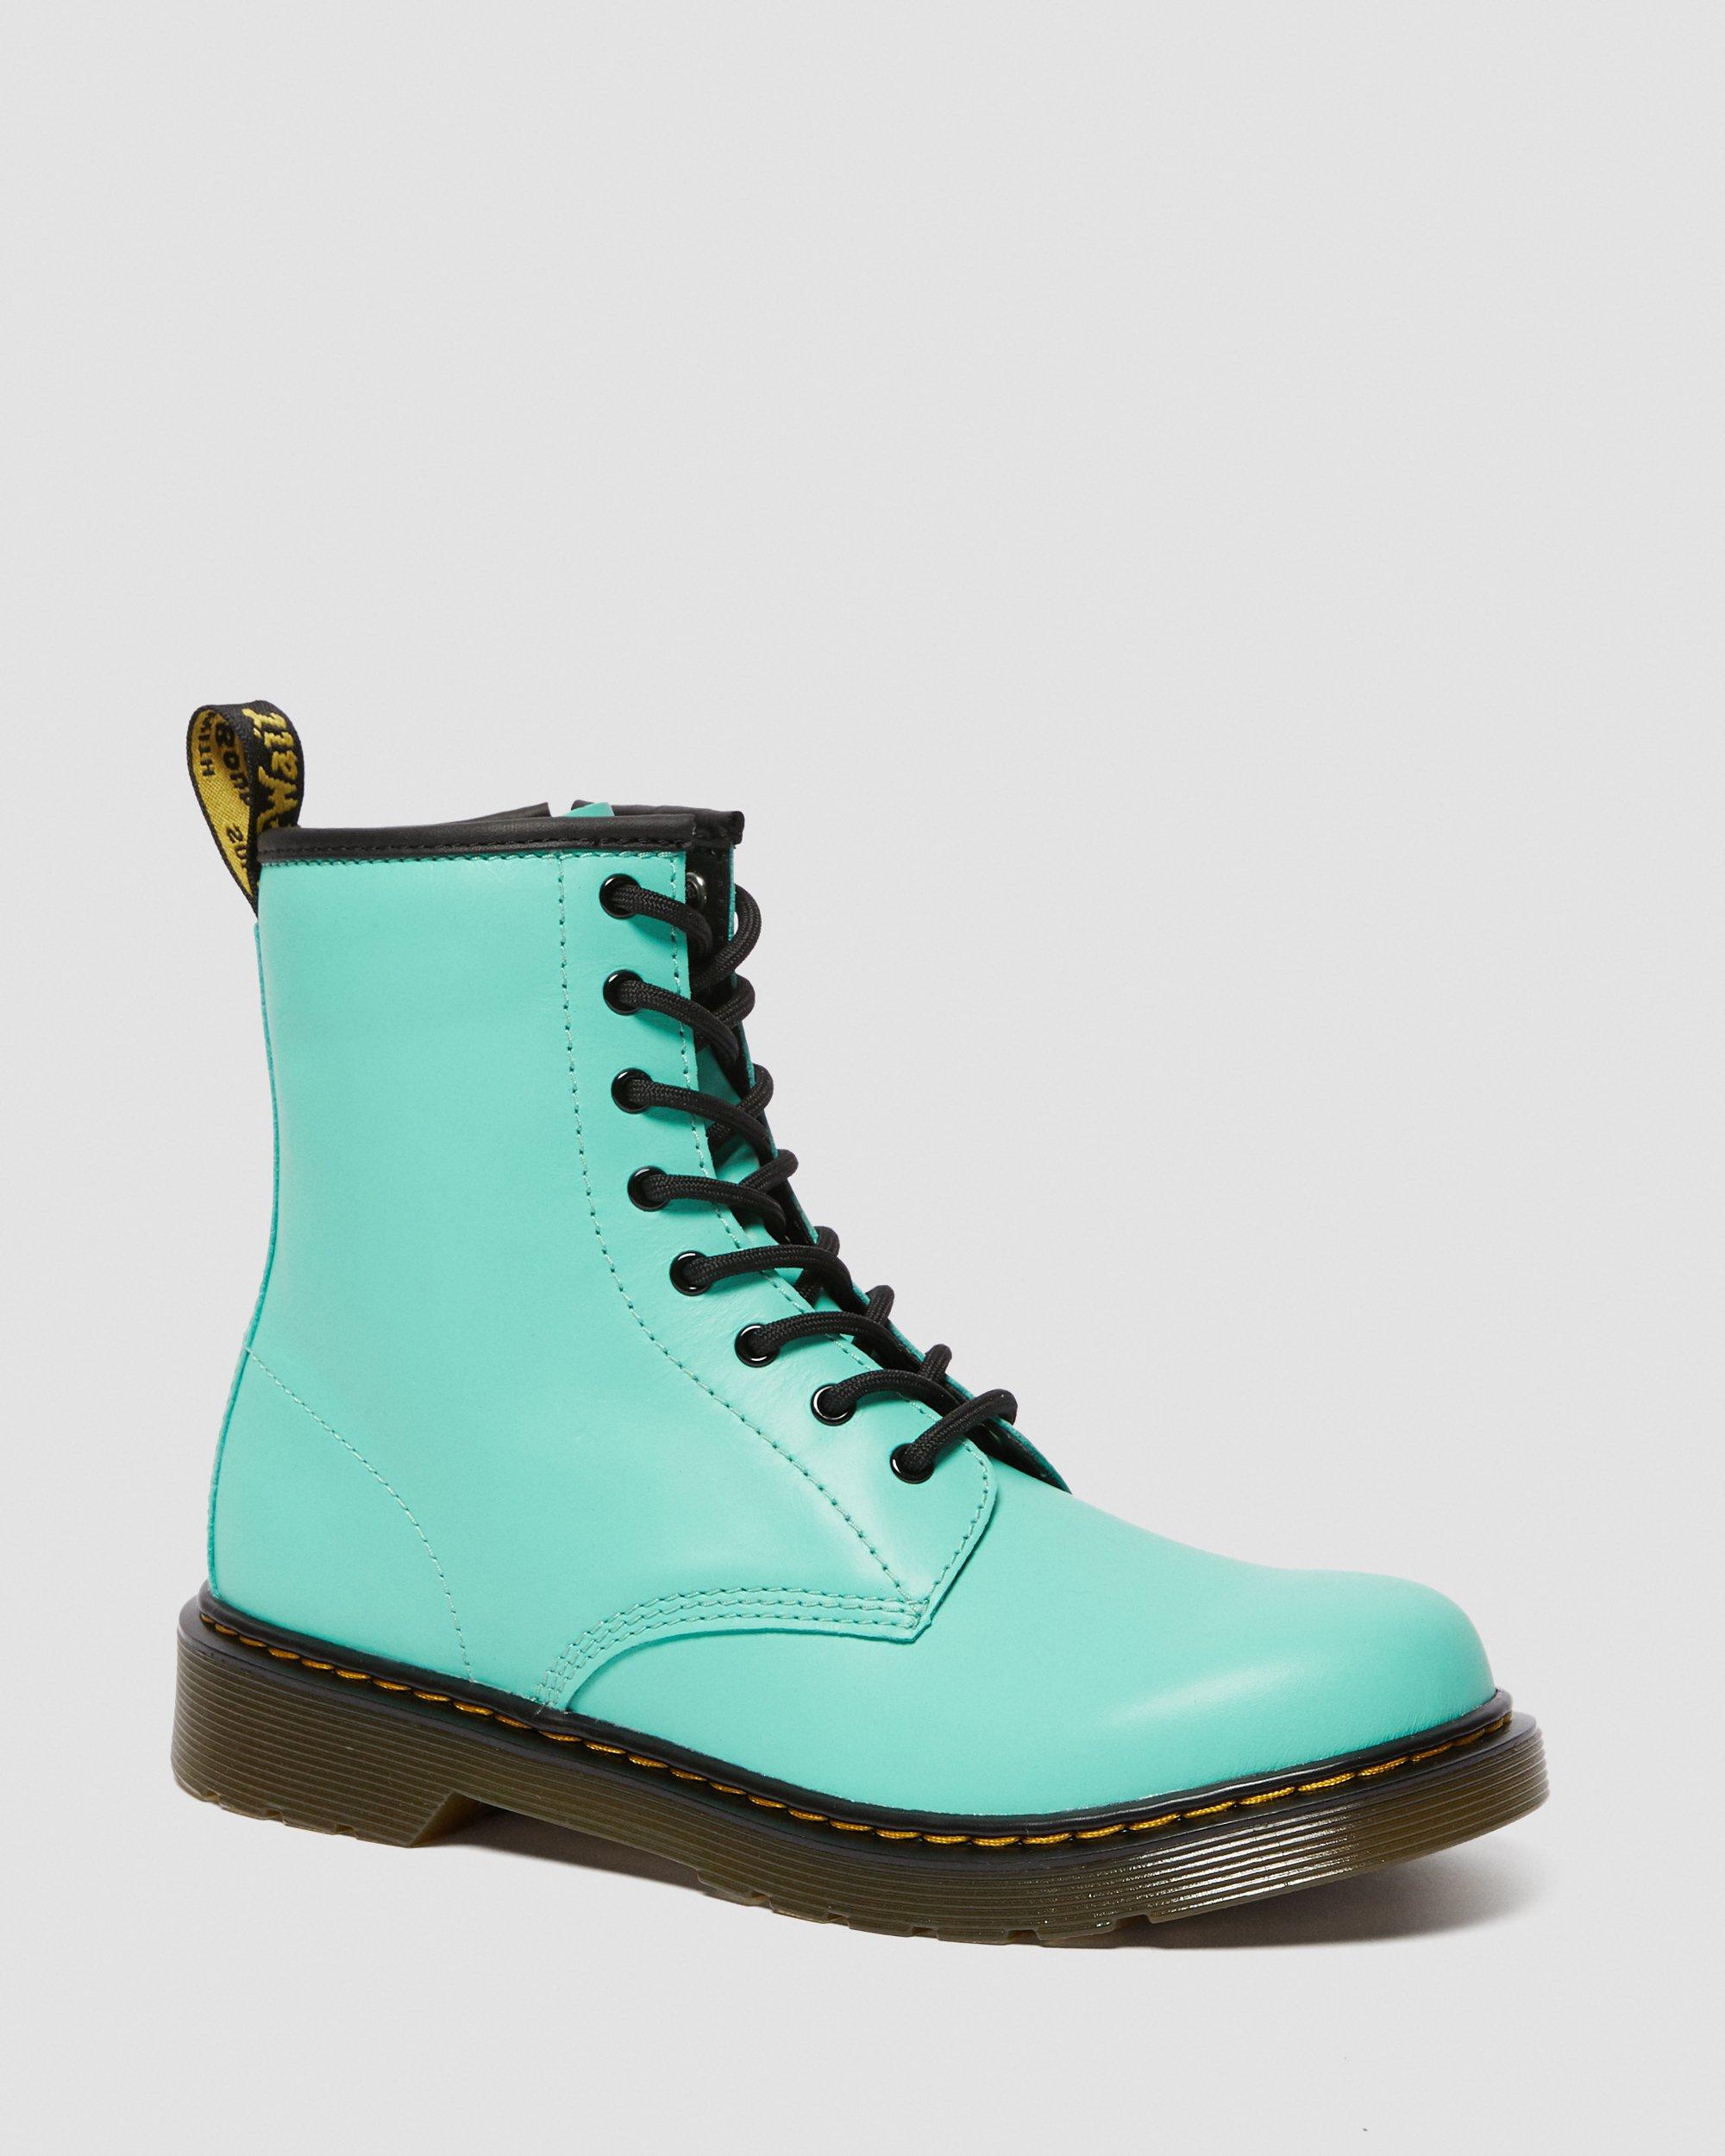 Youth 1460 Leather Lace Up Boots in Peppermint Green | Dr. Martens